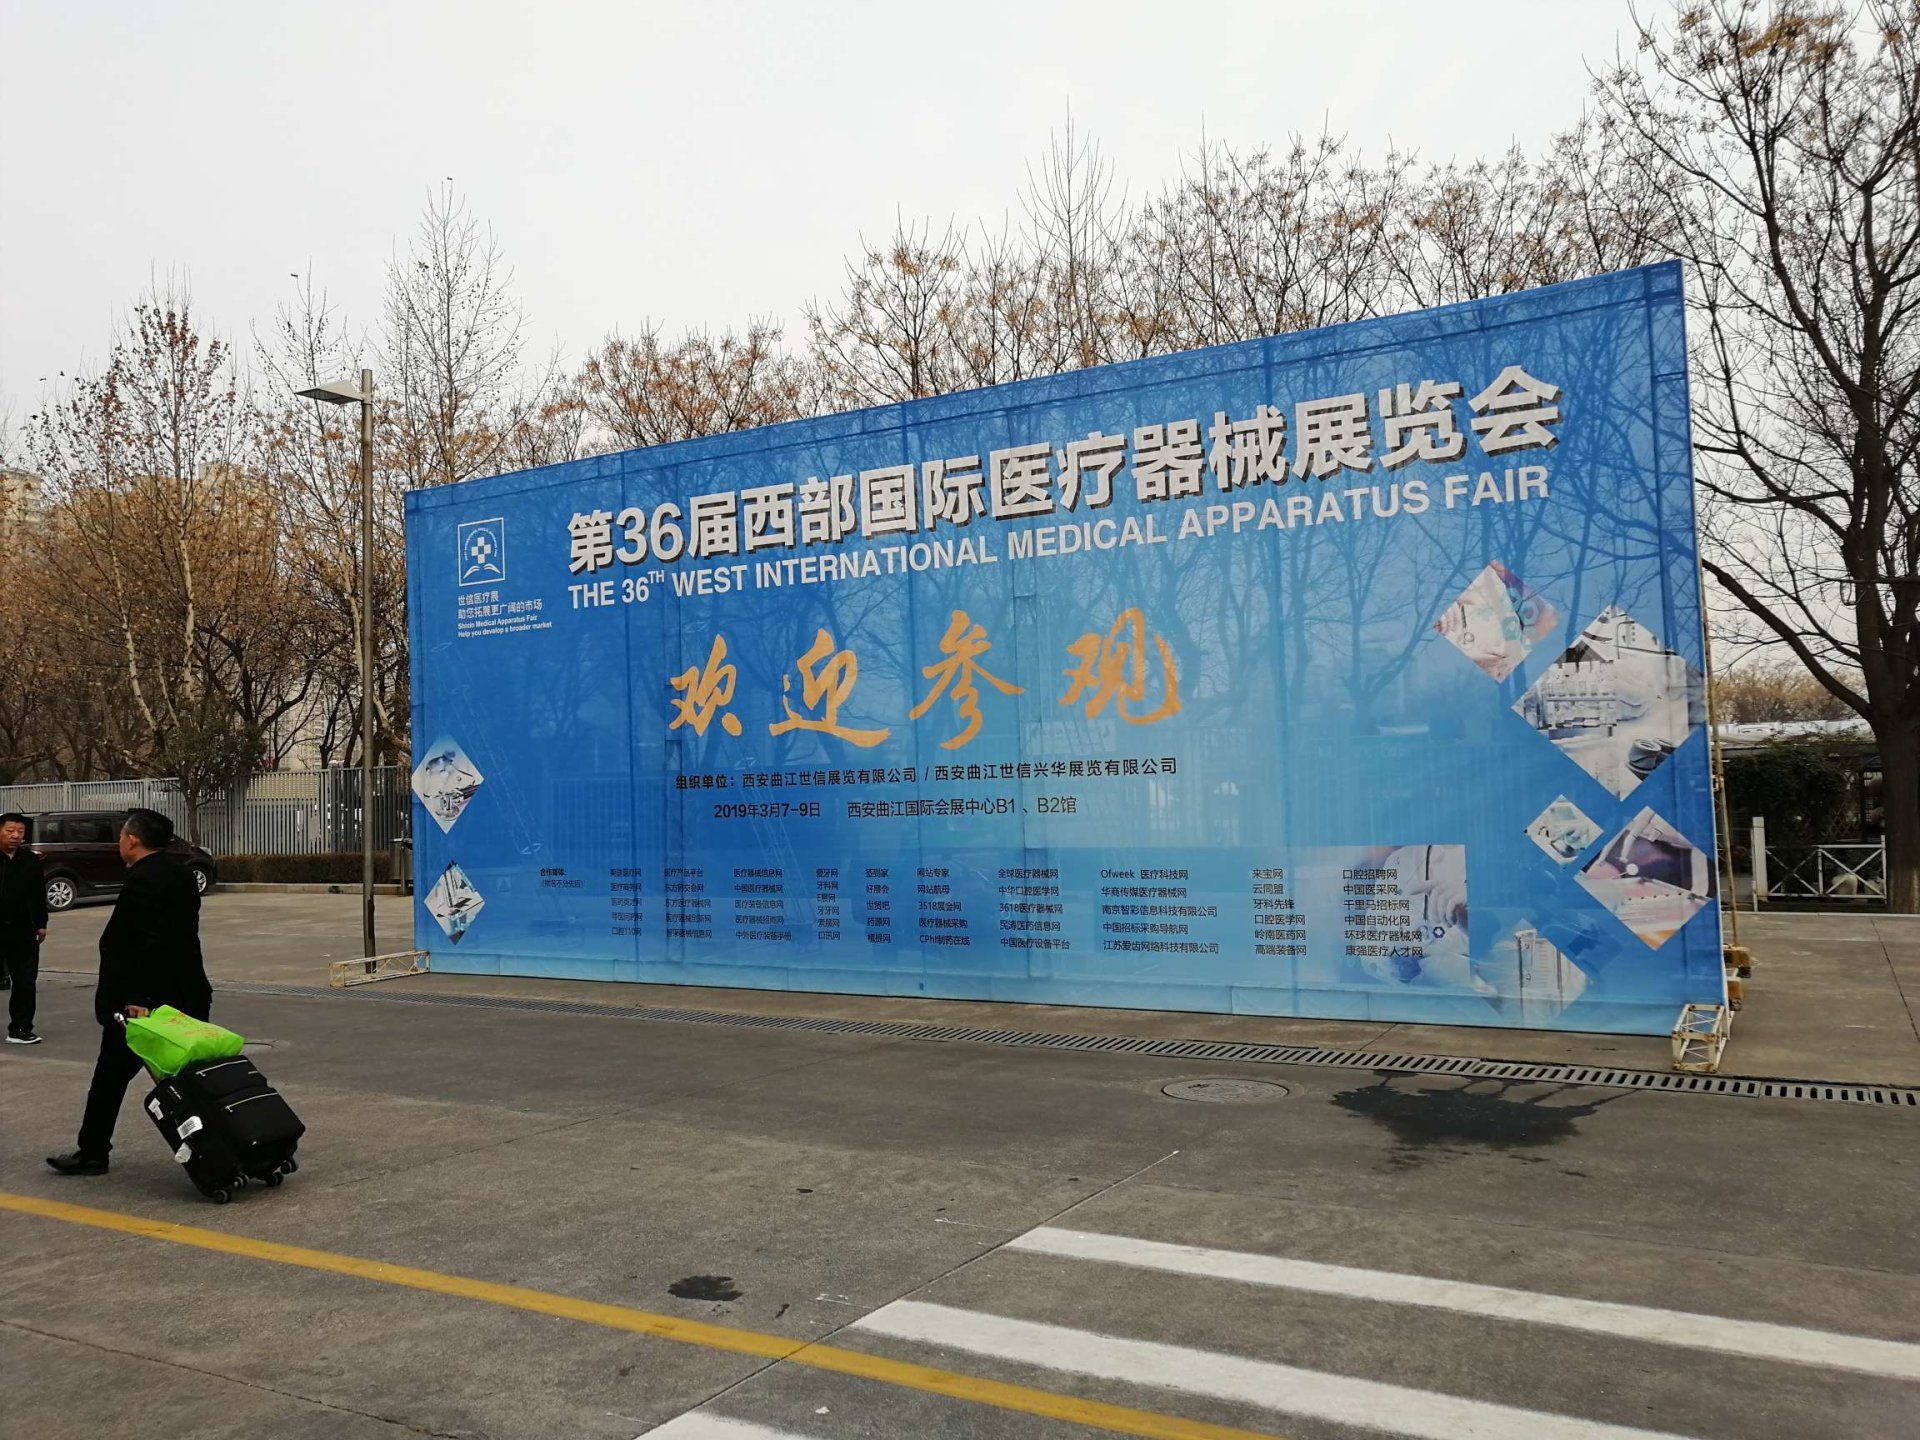 Warm congratulations on the success of the 36th Western International Medical Equipment Exhibition (Xi'an).